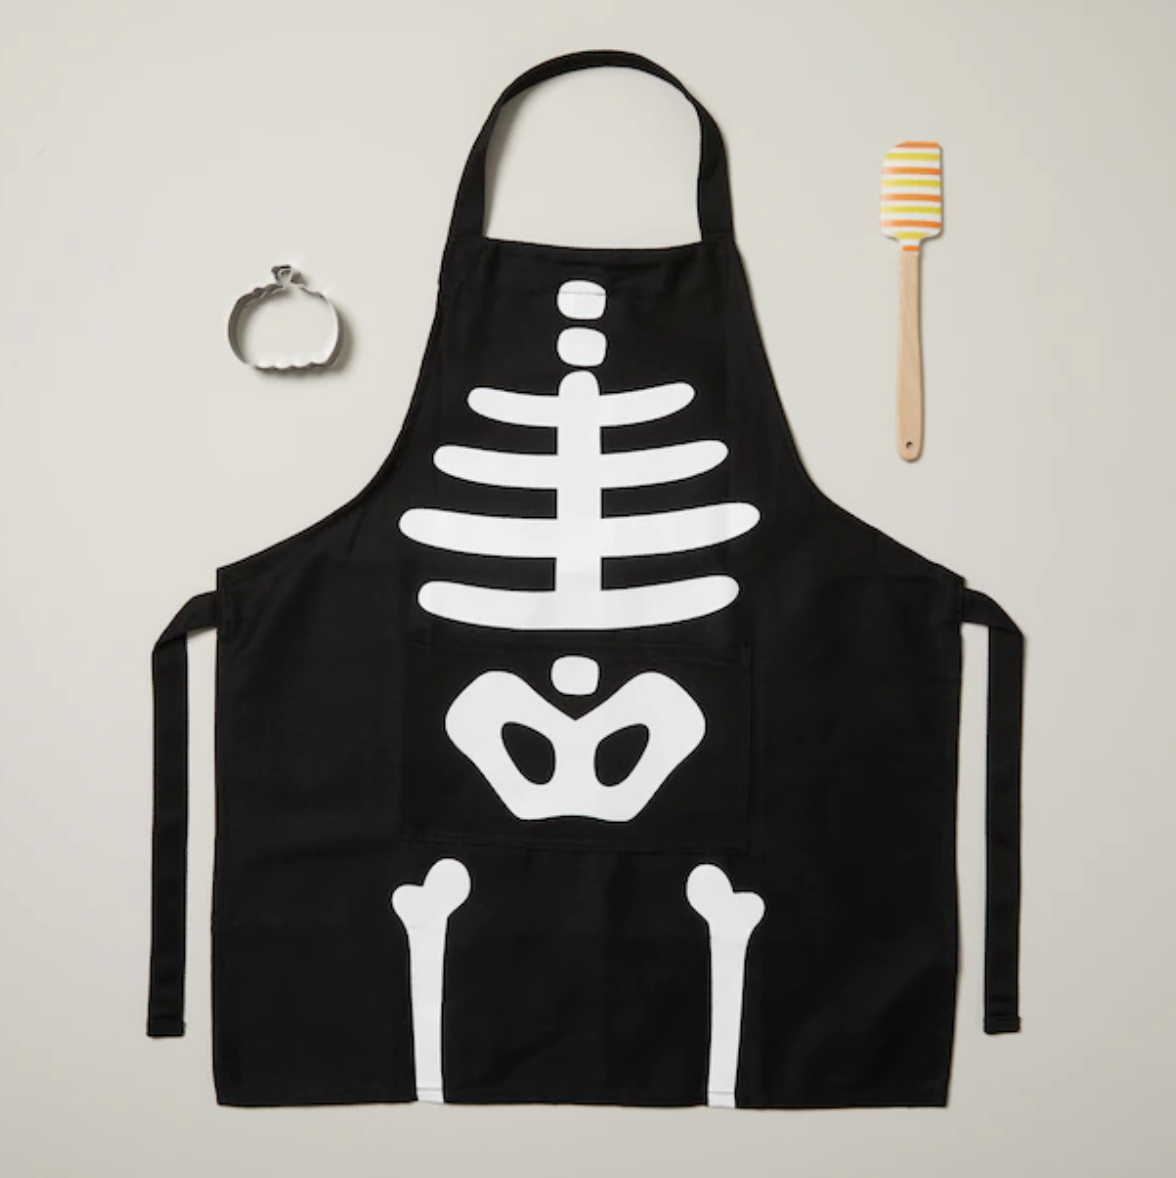 the apron, spatula, and cookie cutter against a plain background